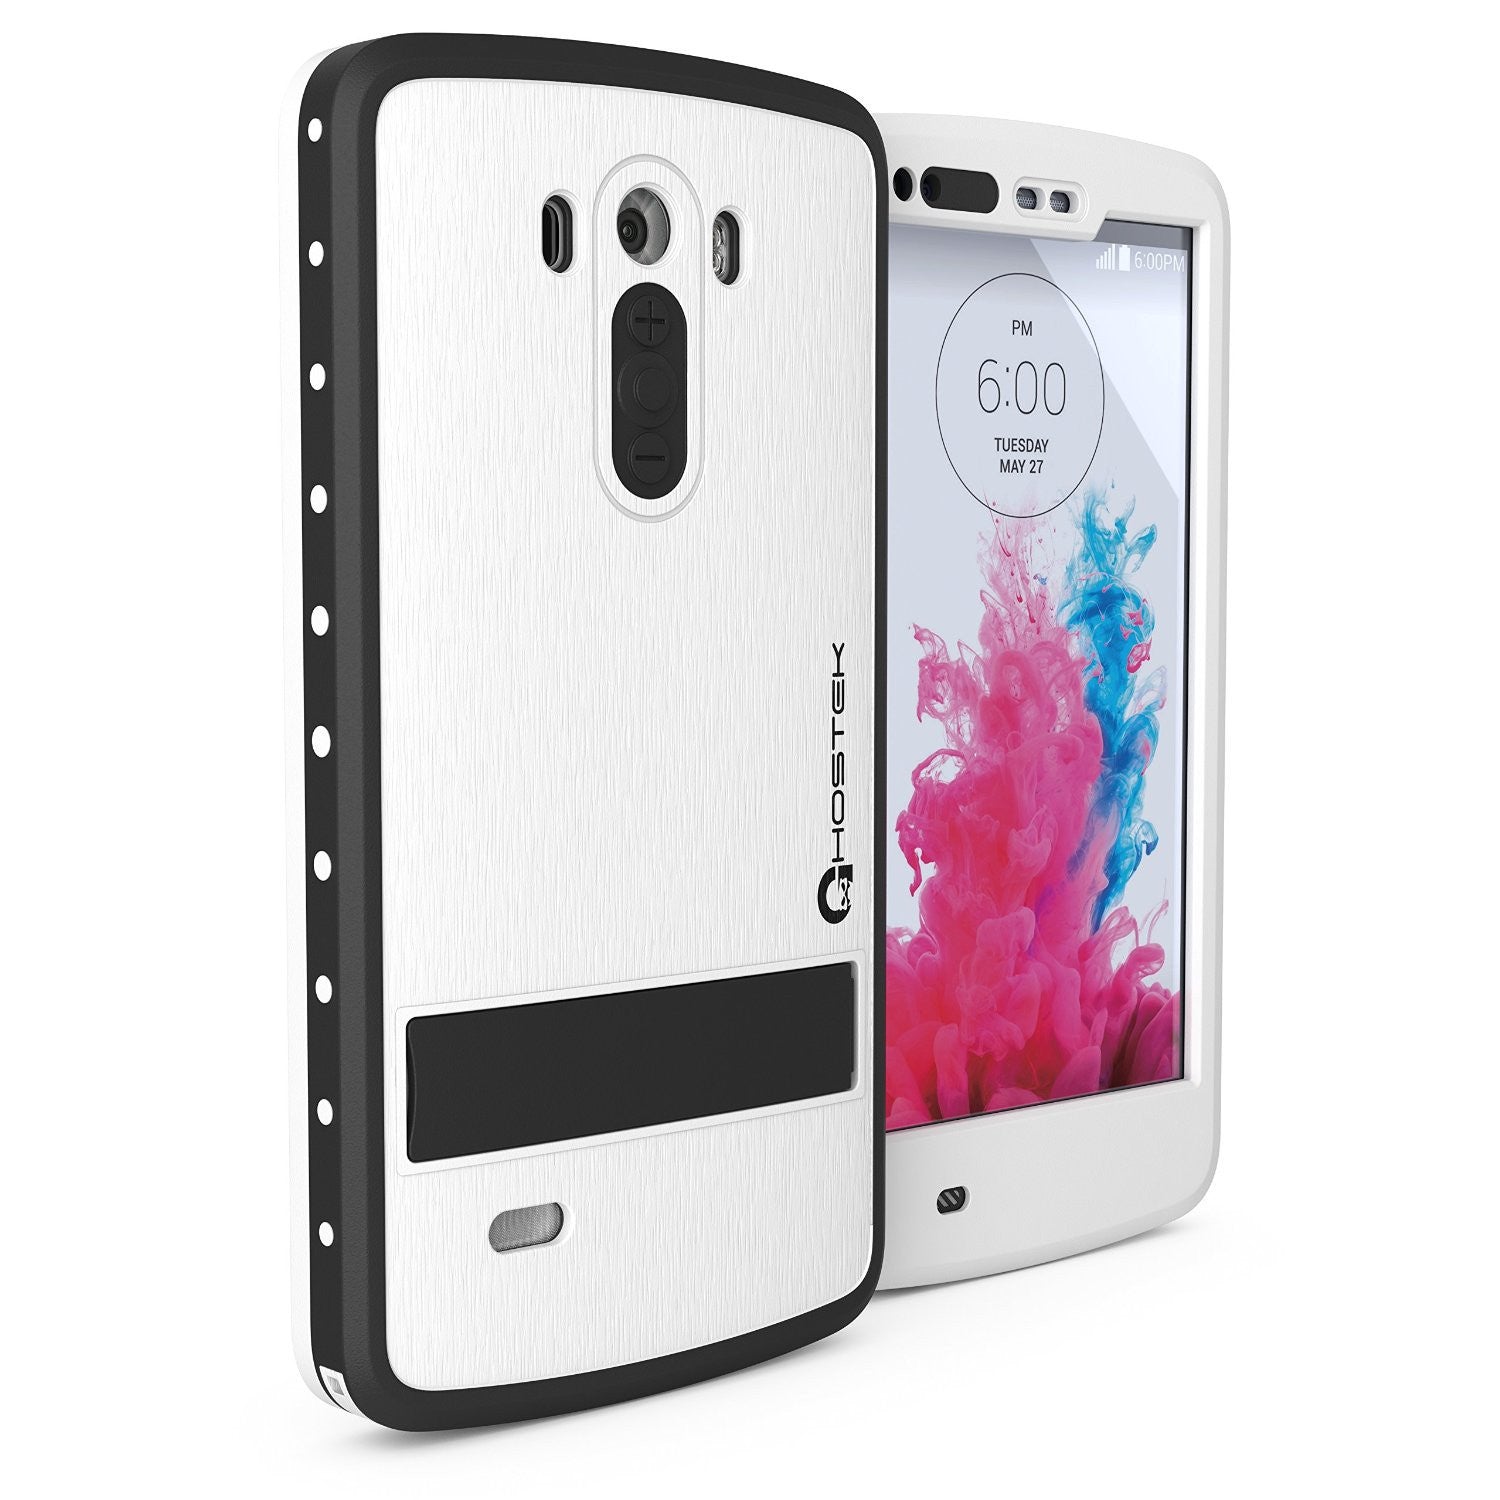 LG G3 Waterproof Case, Ghostek Atomic White W/ Attached Screen Protector LG G3 Slim Fitted (Color in image: white)